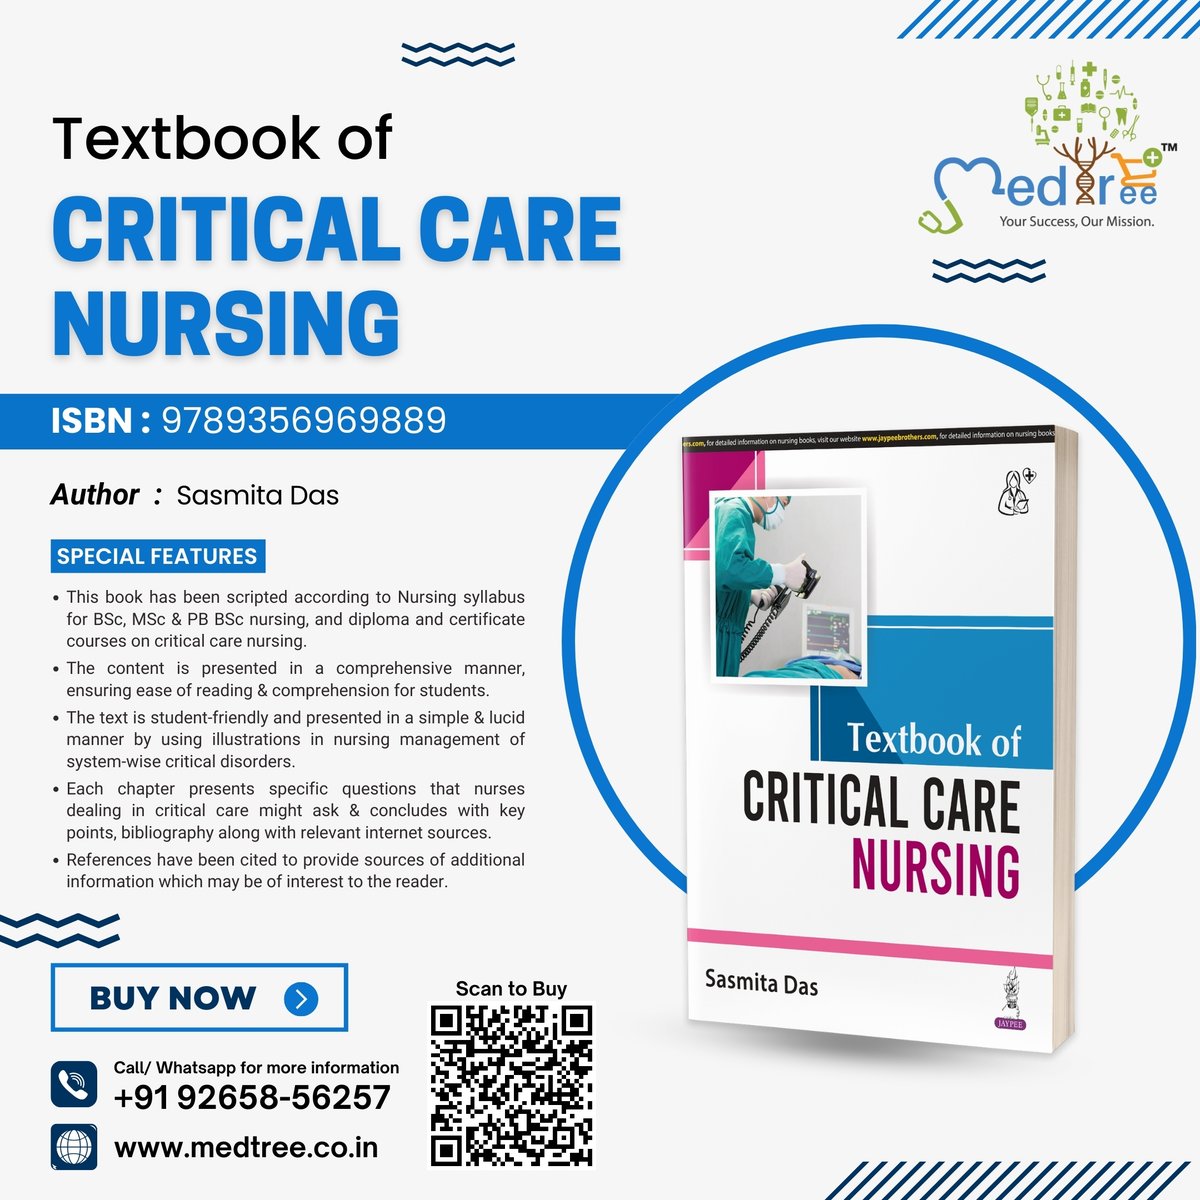 Textbook of Critical Care Nursing
Buy Now: medtree.co.in/product/textbo…

#CriticalCareNursing #newrelease #textbookrelease #SasmitaDas #criticalcaretextbook #NursingEducation #nursingbooks #nursing #nurse #studentnurse #doctor #nursepractitioner #buynow #shopnow #MedTree #medtreeindia